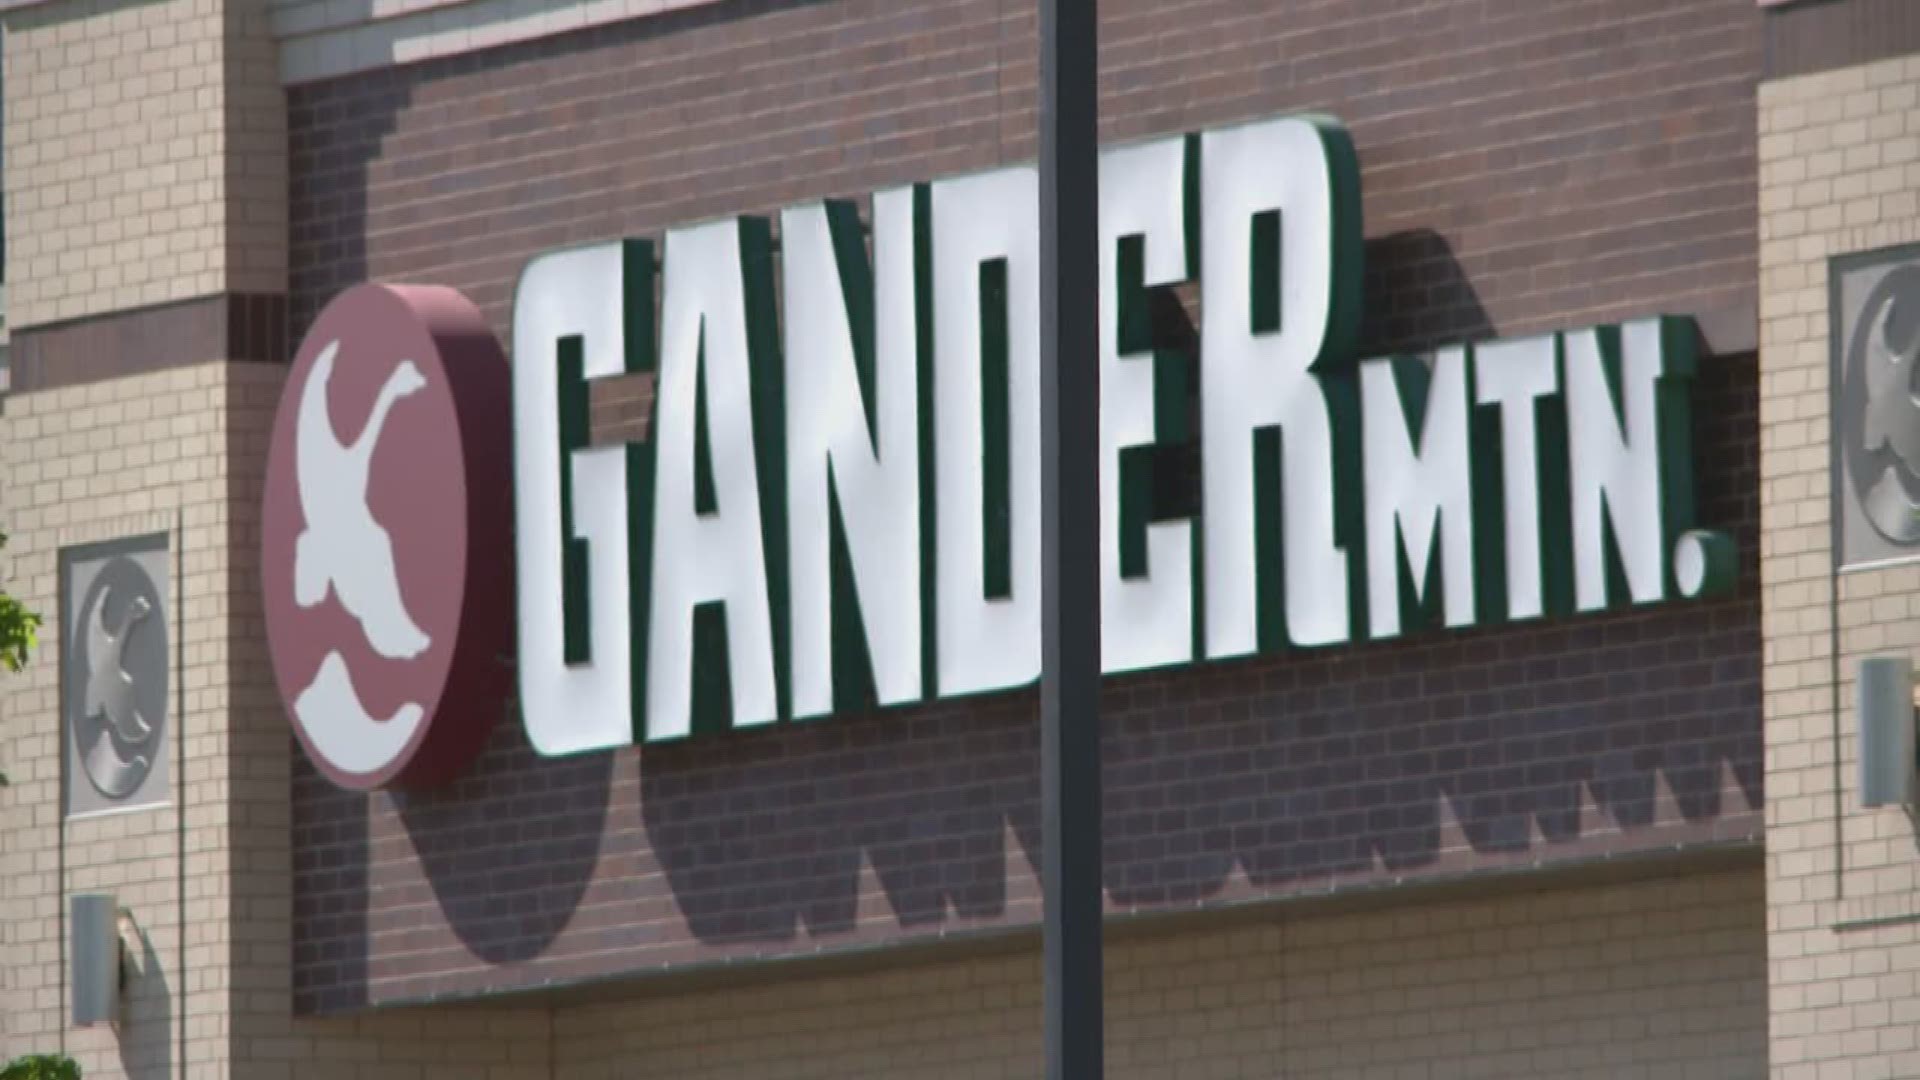 Confusion over whether the outdoor retailer Gander Mountain is going out of business.